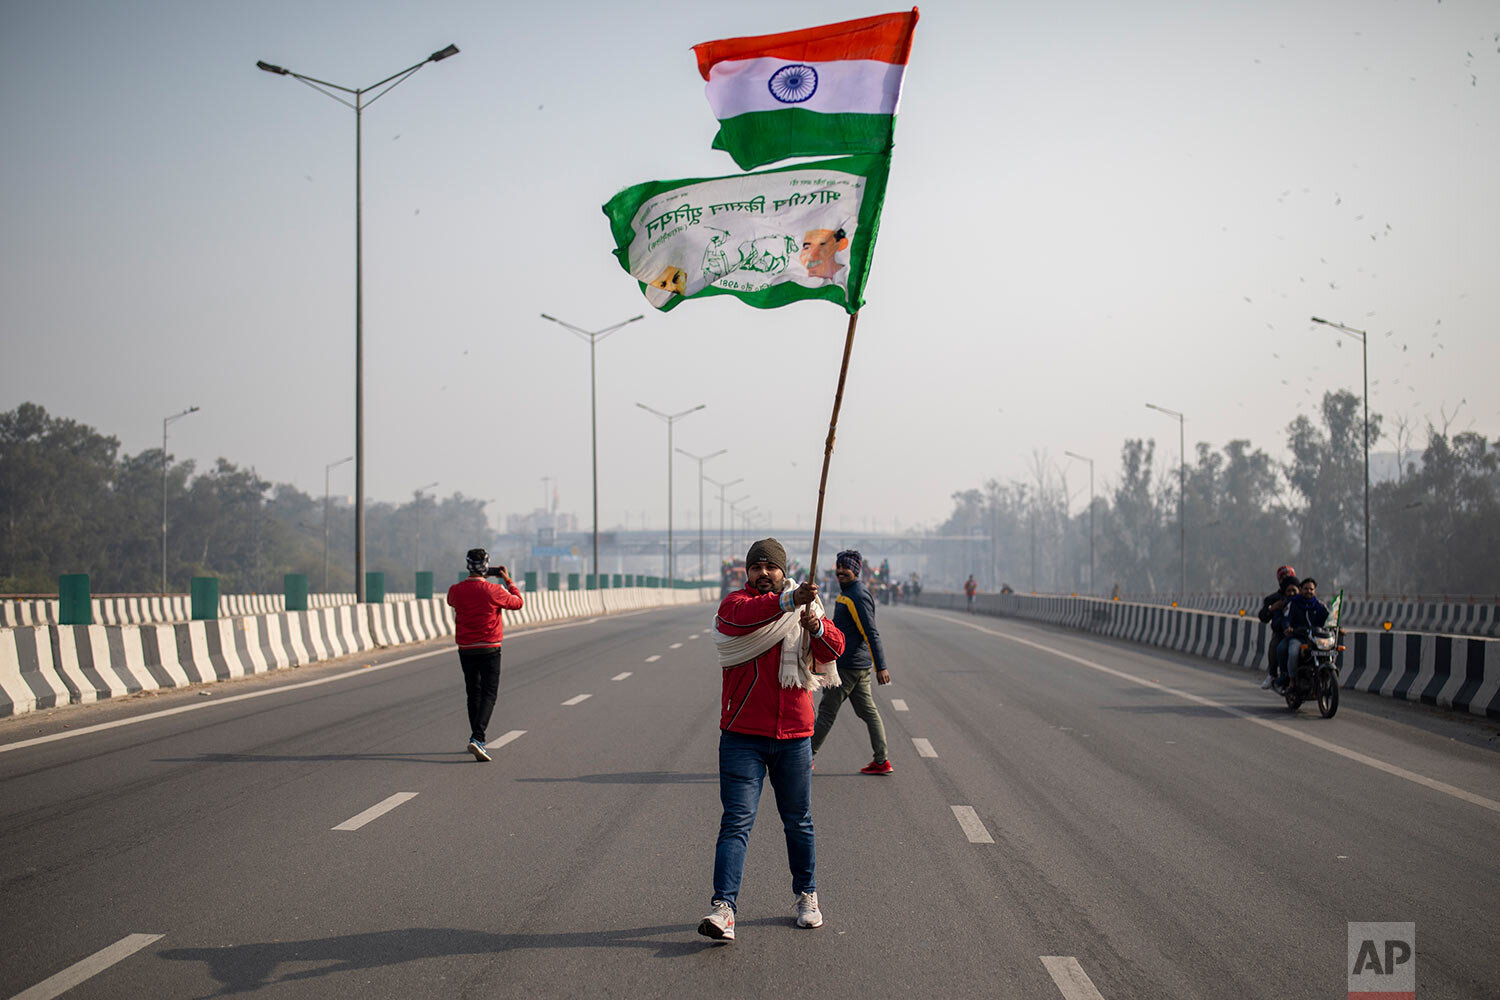  A protesting farmer waves an Indian flag and a farmer union flag as he marches with others to the capital breaking police barricades during India's Republic Day celebrations in New Delhi, India, Tuesday, Jan. 26, 2021. (AP Photo/Altaf Qadri) 